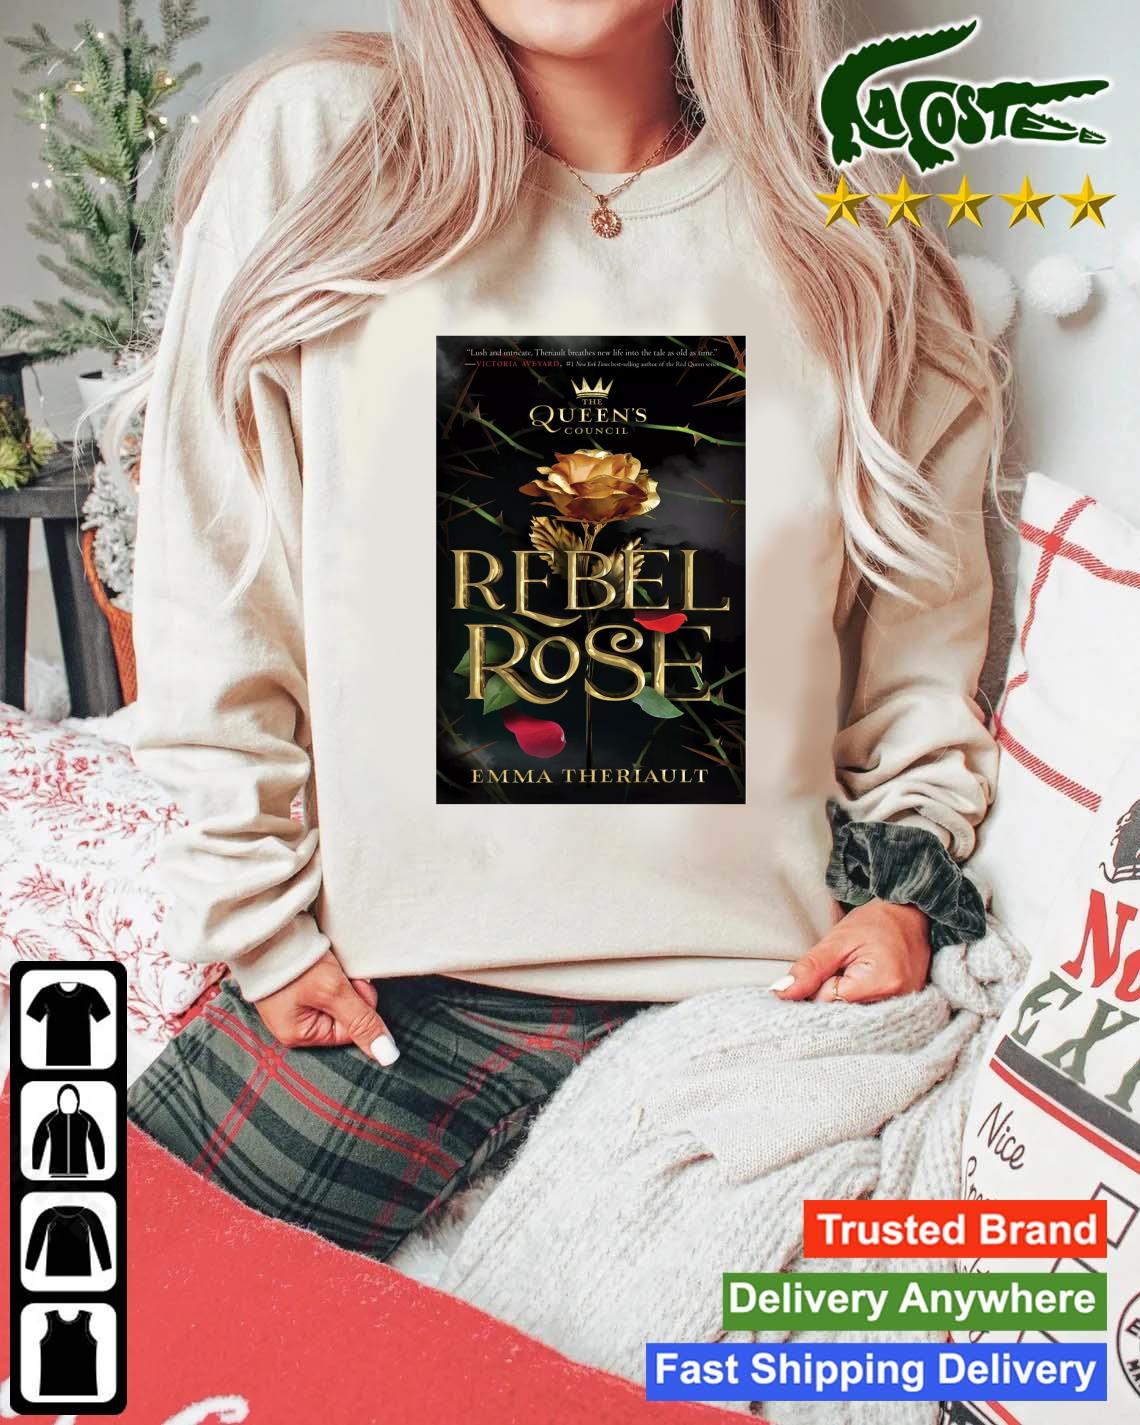 The Queen's Council Rebel Rose Emma Theriault Sweats Mockup Sweater